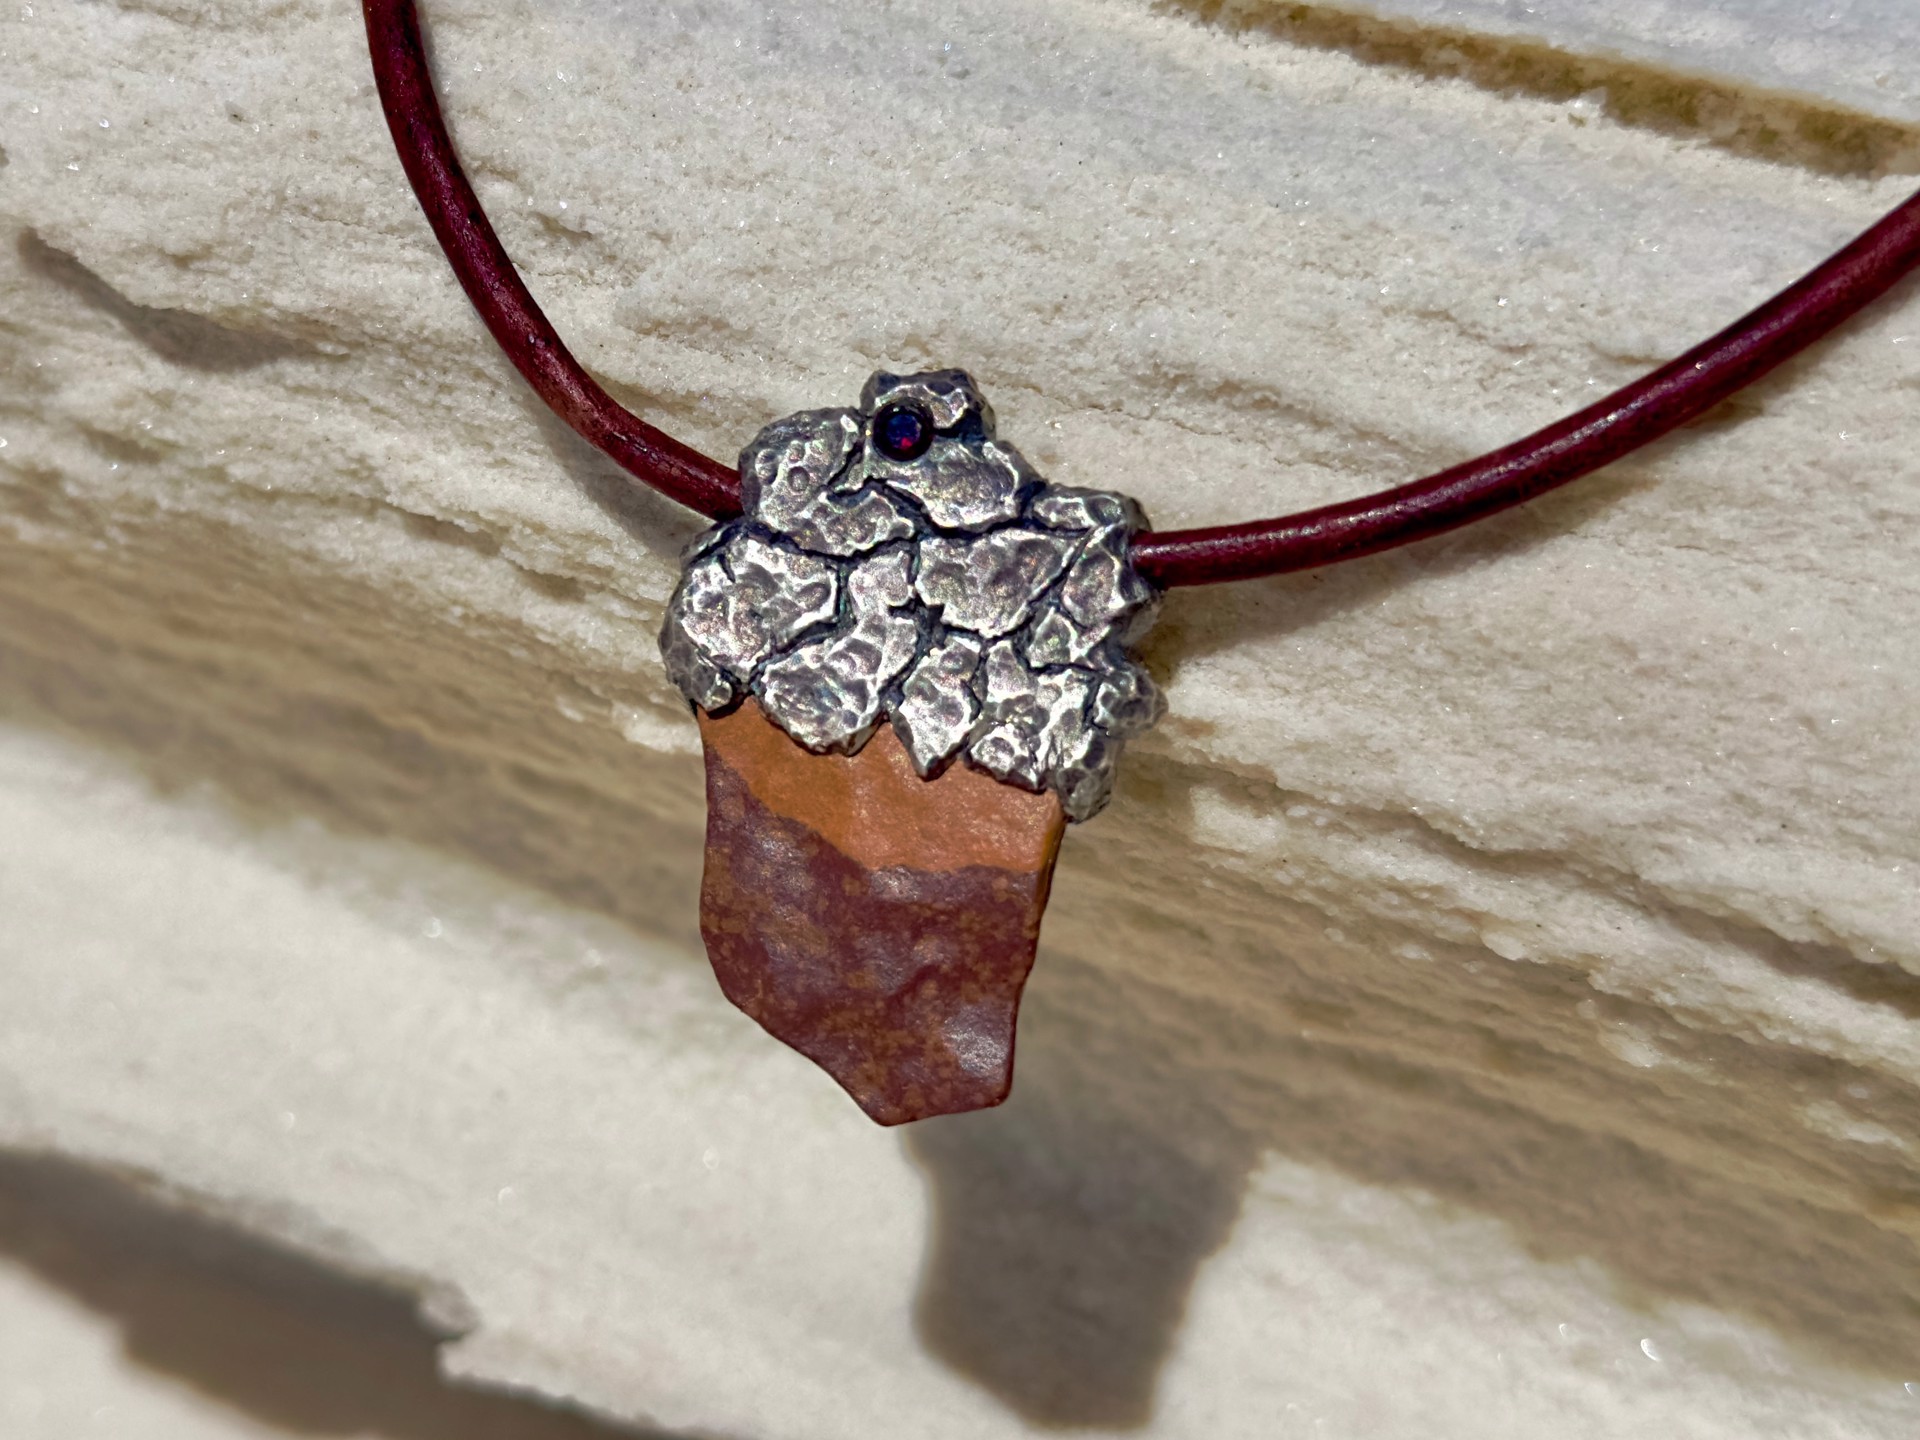 Capped Collected Rocks Necklace on Leather- Garnet by Clementine & Co. Jewelry